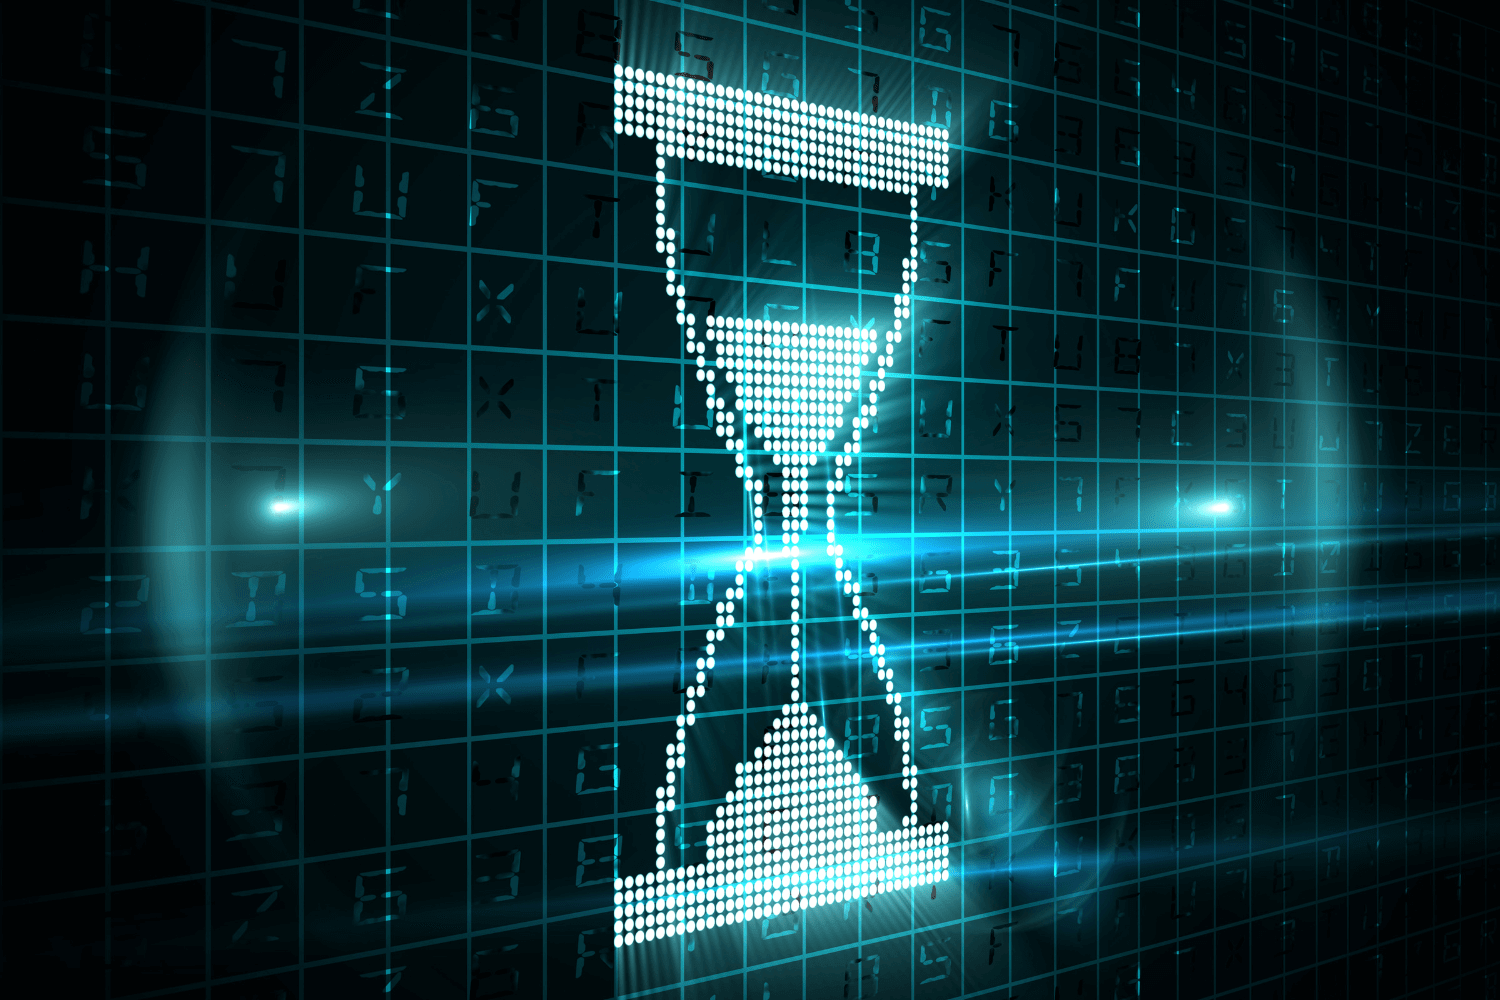 Digital hourglass with illuminated pixels against a dark grid background